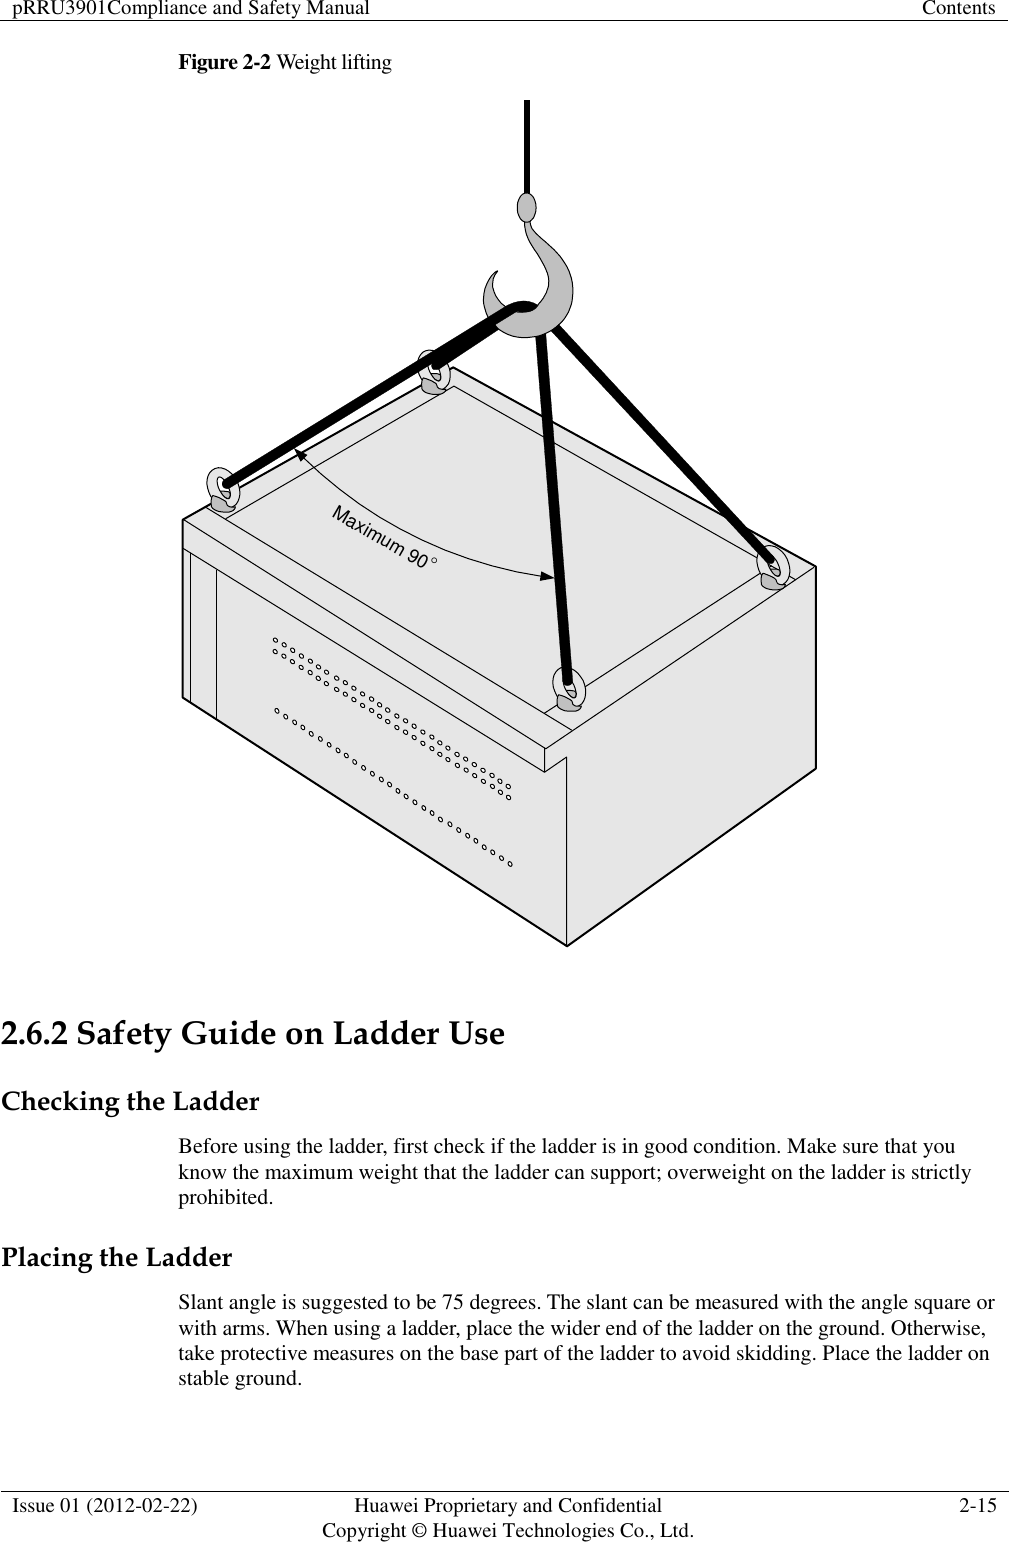 pRRU3901Compliance and Safety Manual Contents  Issue 01 (2012-02-22) Huawei Proprietary and Confidential           Copyright © Huawei Technologies Co., Ltd. 2-15  Figure 2-2 Weight lifting Maximum 90  2.6.2 Safety Guide on Ladder Use Checking the Ladder Before using the ladder, first check if the ladder is in good condition. Make sure that you know the maximum weight that the ladder can support; overweight on the ladder is strictly prohibited. Placing the Ladder Slant angle is suggested to be 75 degrees. The slant can be measured with the angle square or with arms. When using a ladder, place the wider end of the ladder on the ground. Otherwise, take protective measures on the base part of the ladder to avoid skidding. Place the ladder on stable ground. 